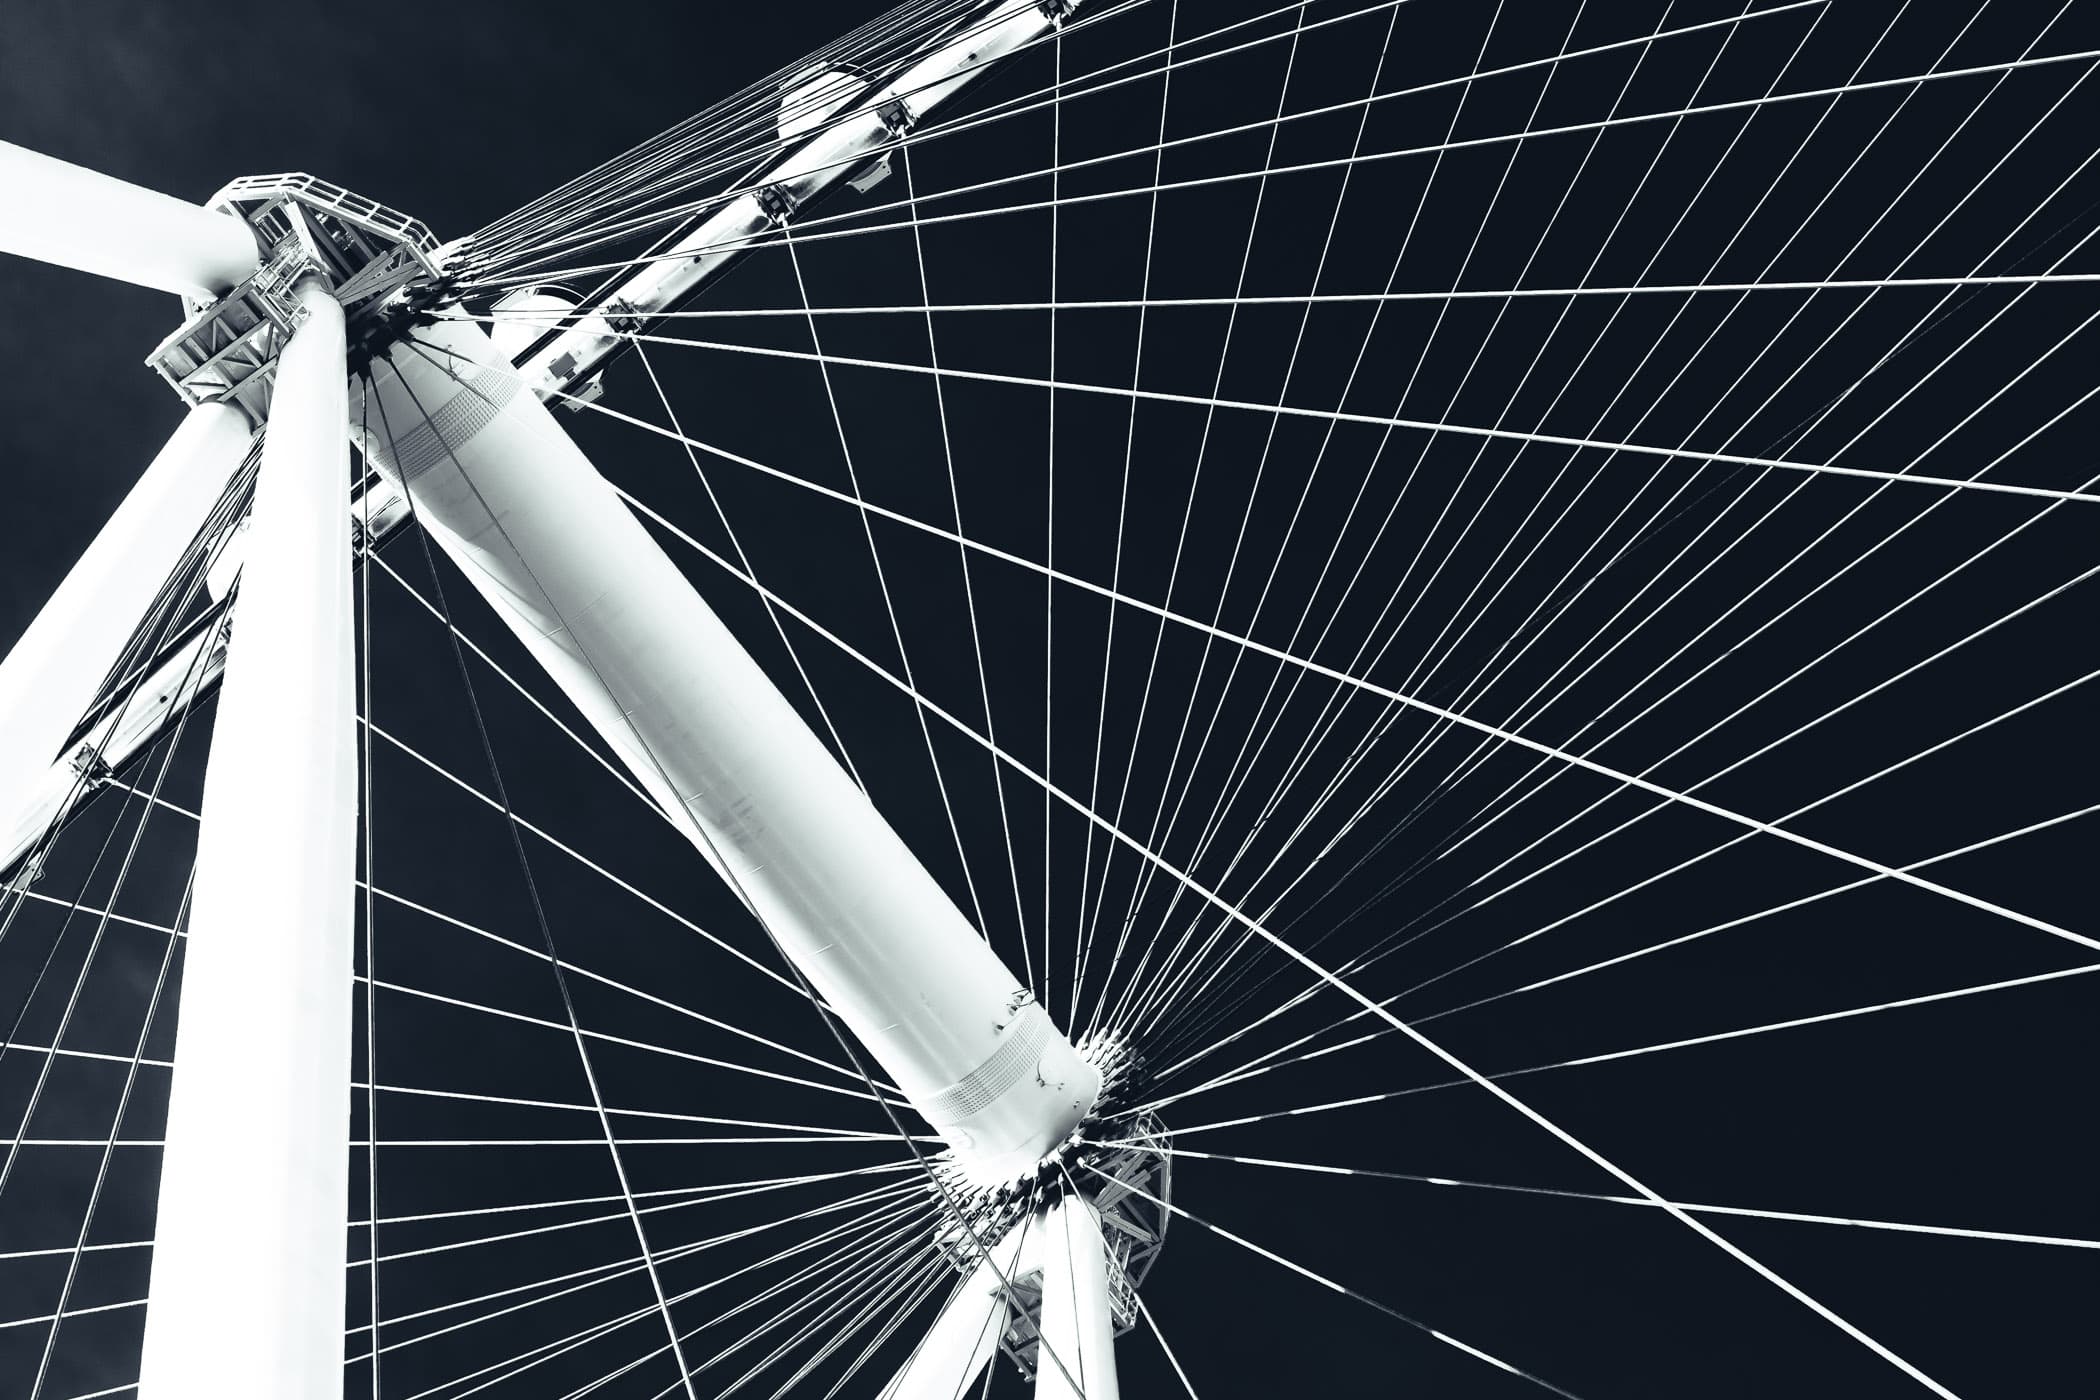 The complex structure of the High Roller observation wheel, Las Vegas.